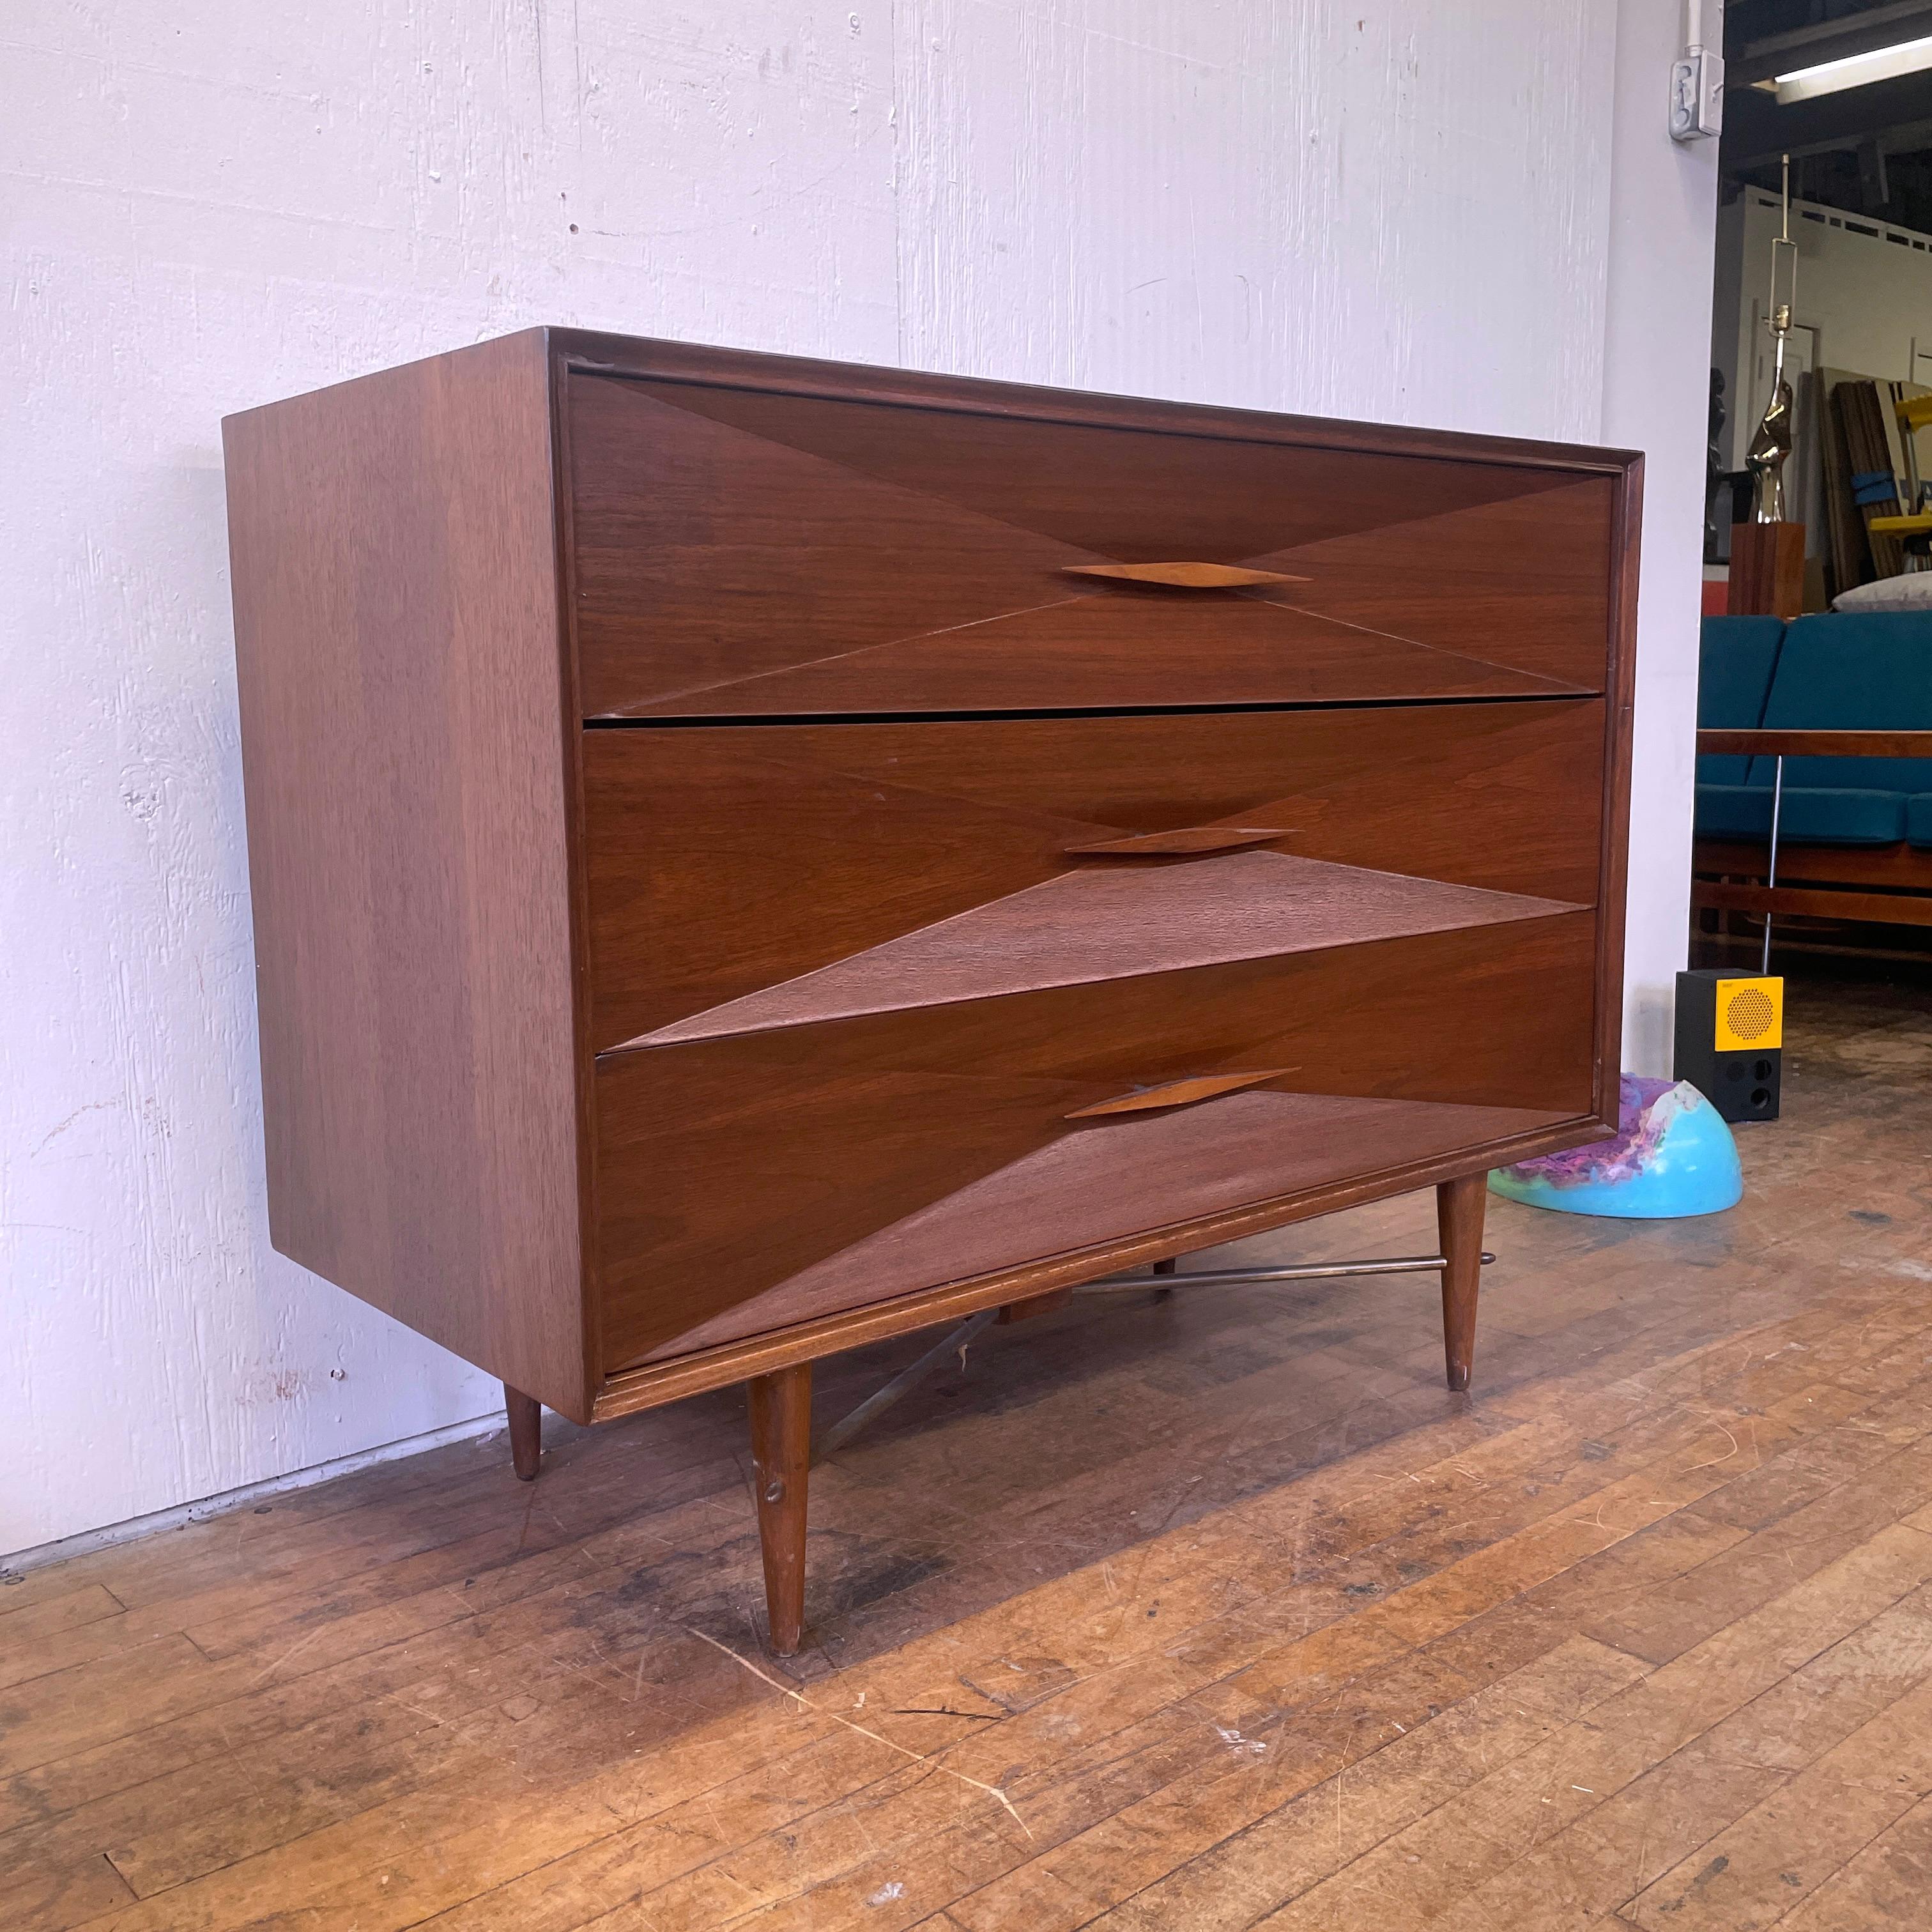 A gorgeous Mid-Century Modern wooden dresser with faceted front and diamond shaped handles; maker unknown. Made of walnut wood with wooden handles. Overall in excellent condition with no scuffs or scratches. One of the metal spacers on one drawer